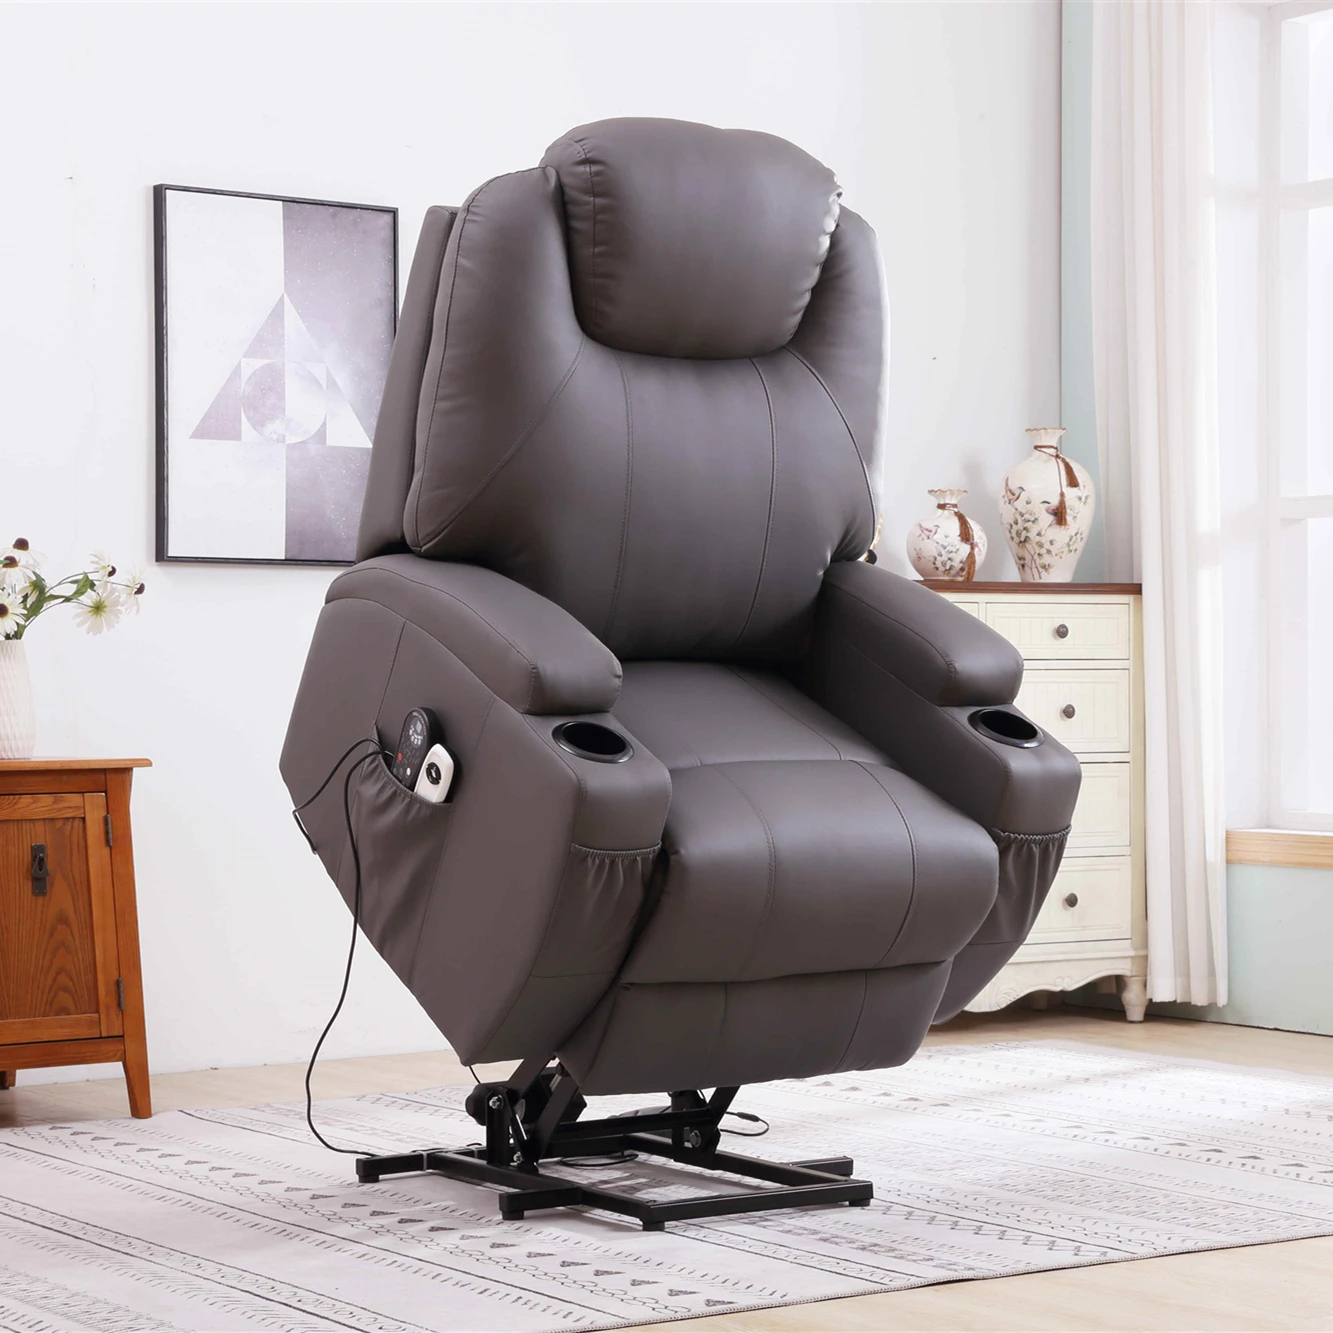 Jky Furniture Electric Recliner Chair Microfiber Cover With ...